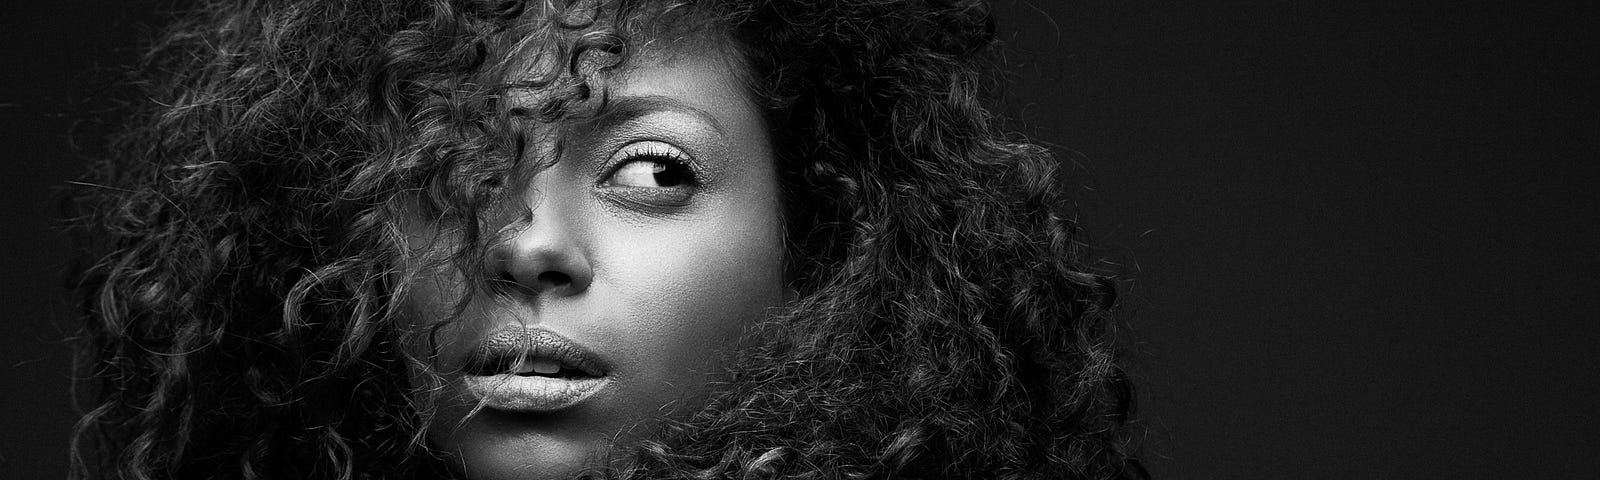 Black and white portrait of a black woman with curly hair